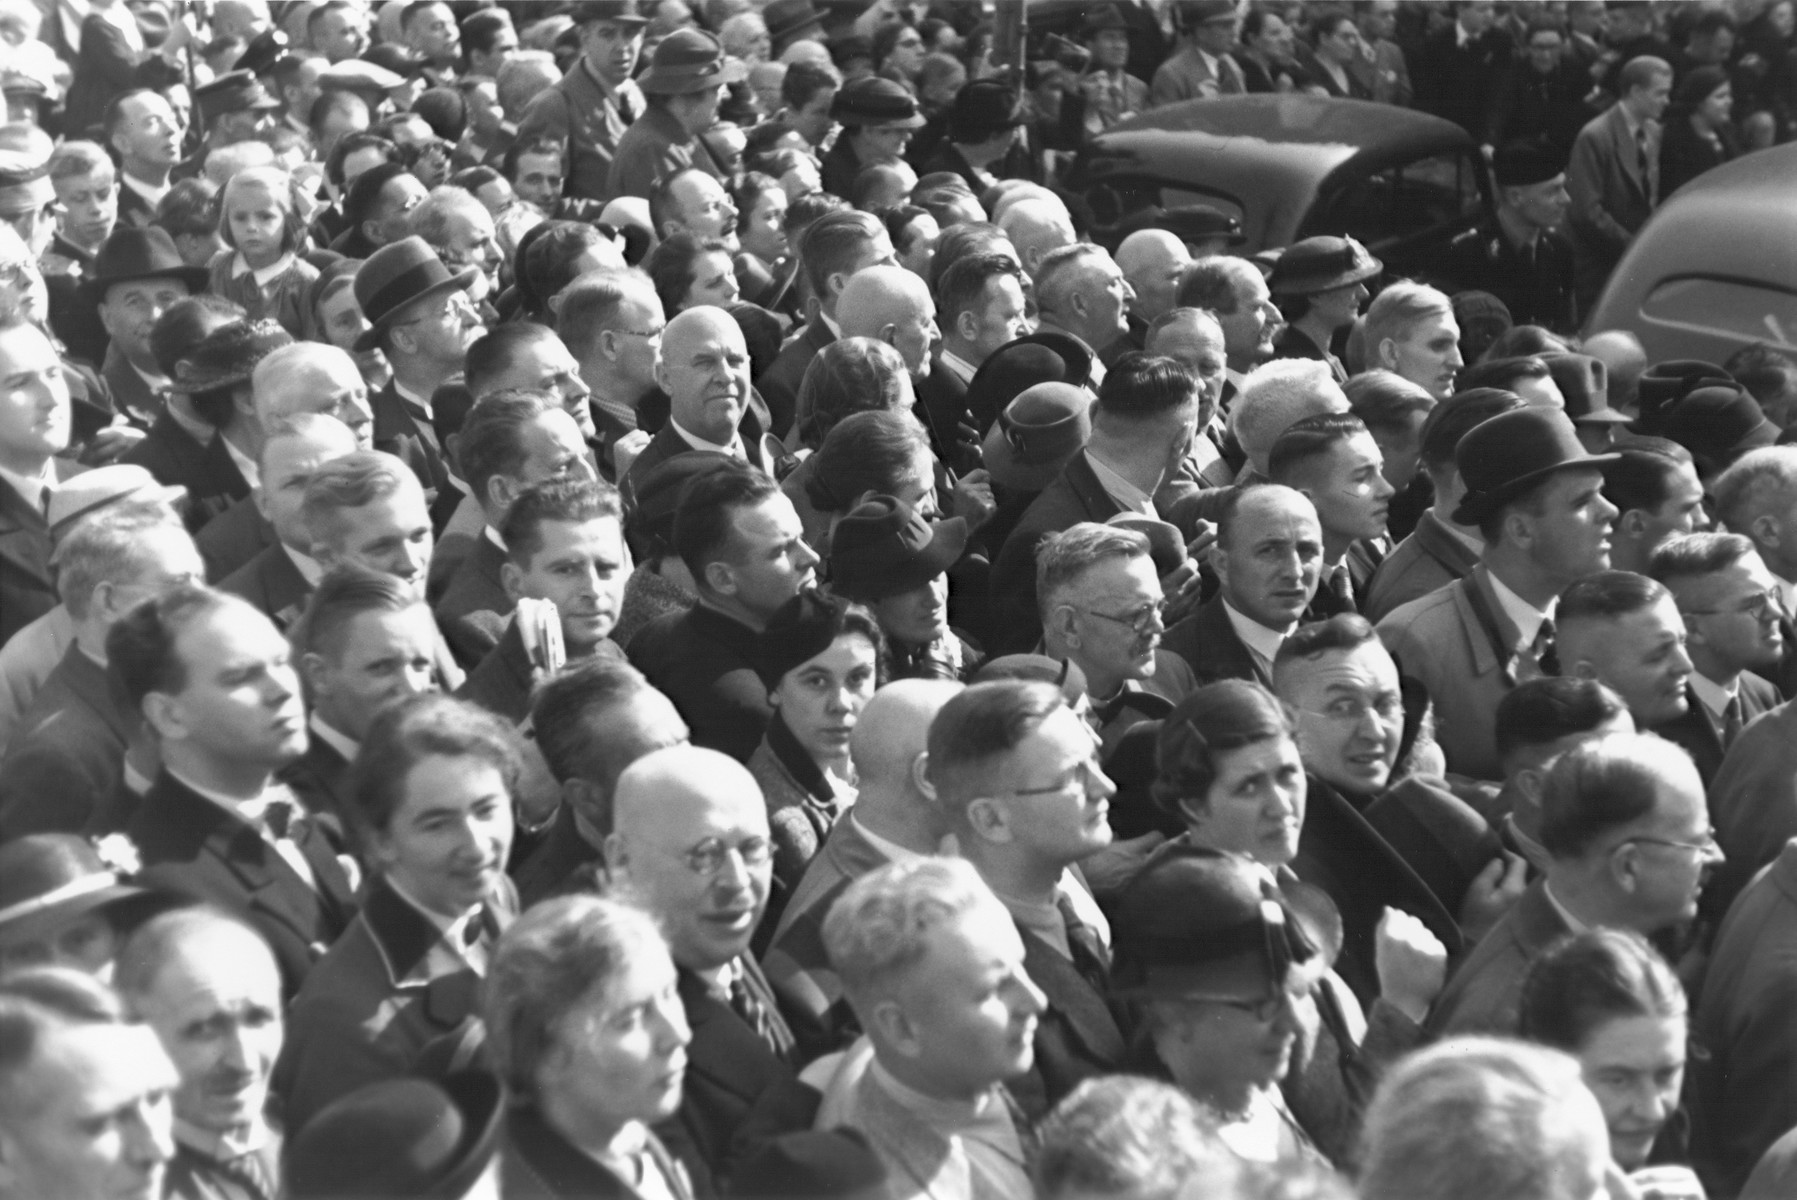 A large crowd of Germans attends a Nazi rally in Cologne.